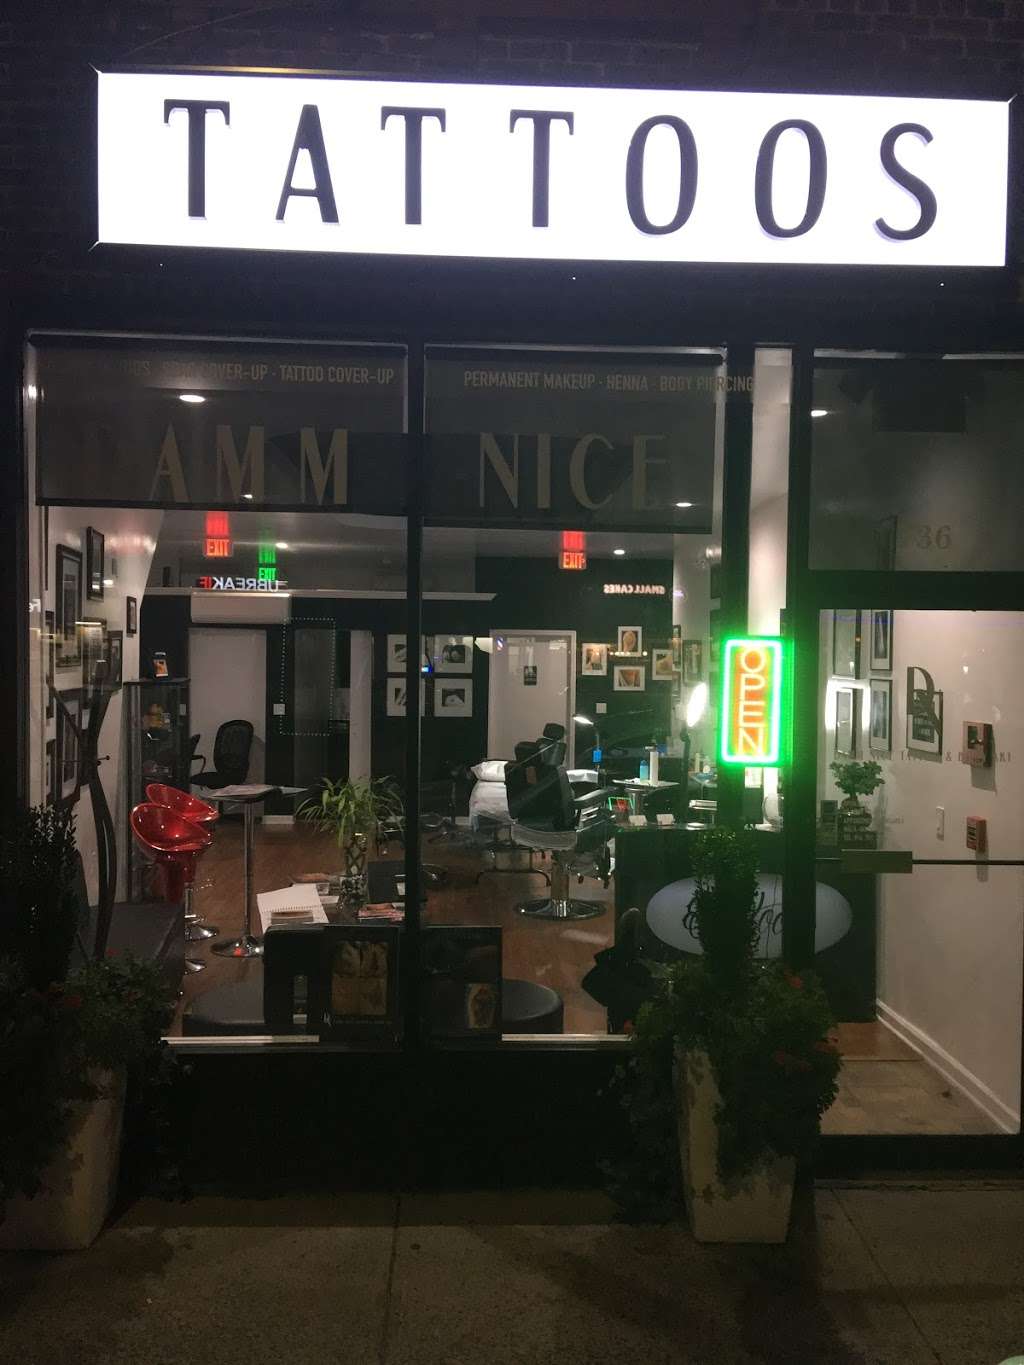 Damm Nice Tattoo and Body Art | 736 Central Park Ave, Scarsdale, NY 10583 | Phone: (914) 751-3266